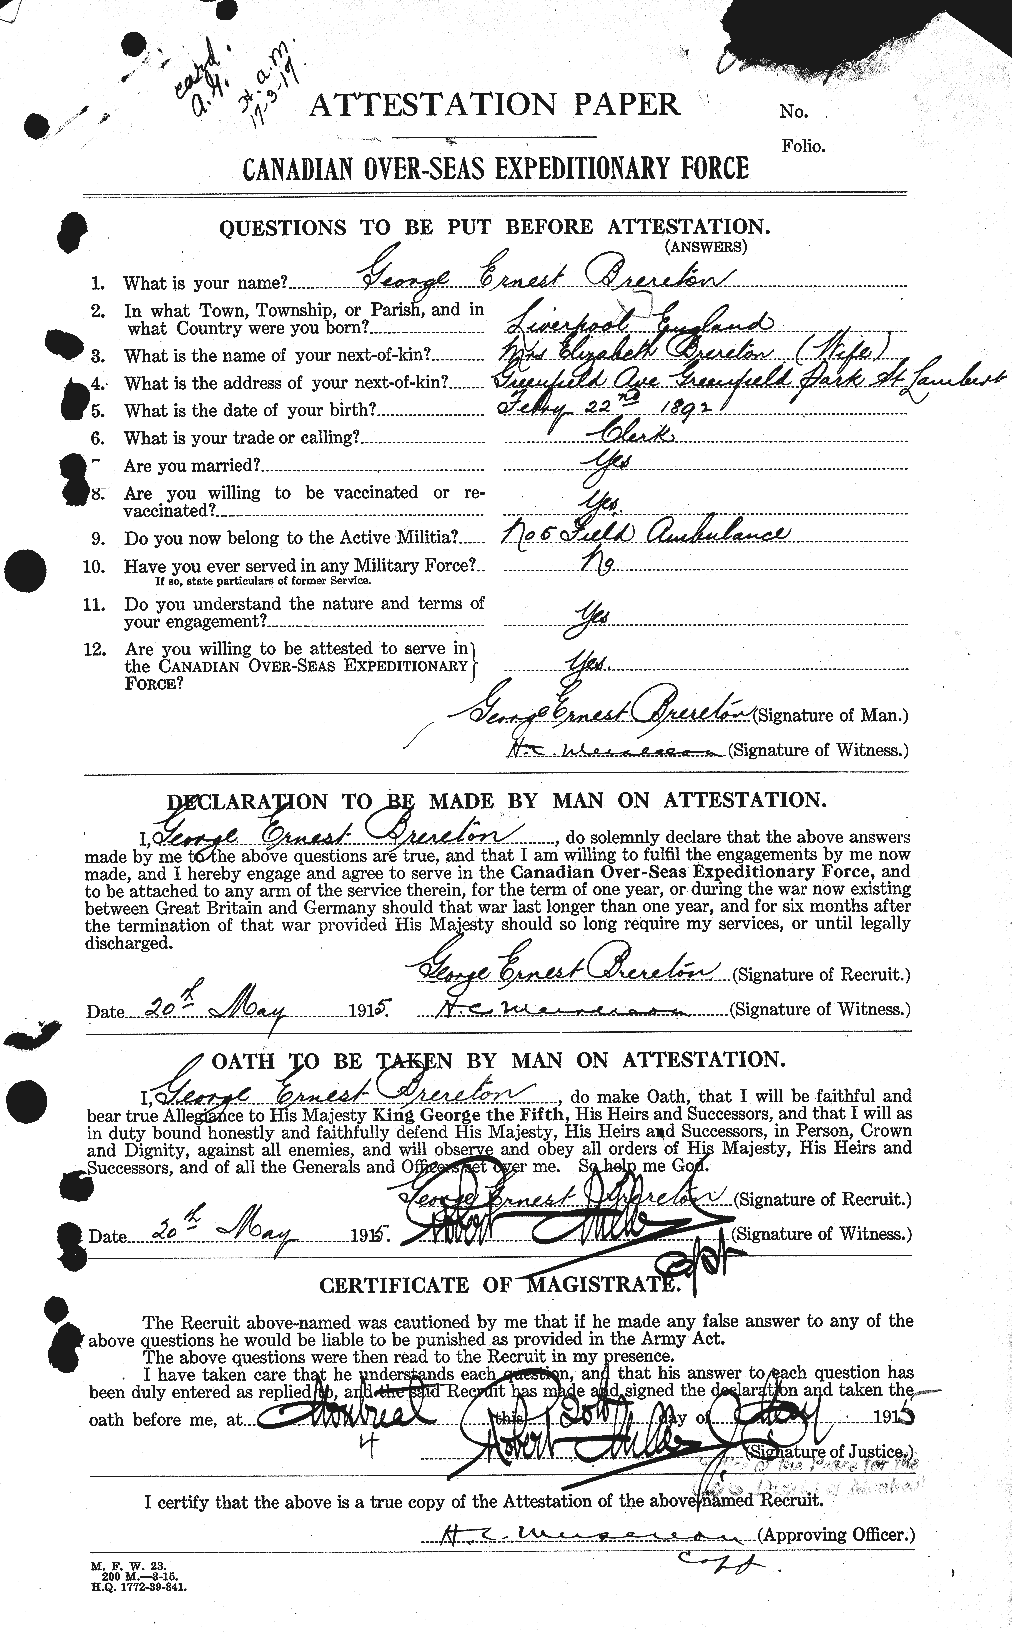 Personnel Records of the First World War - CEF 262689a